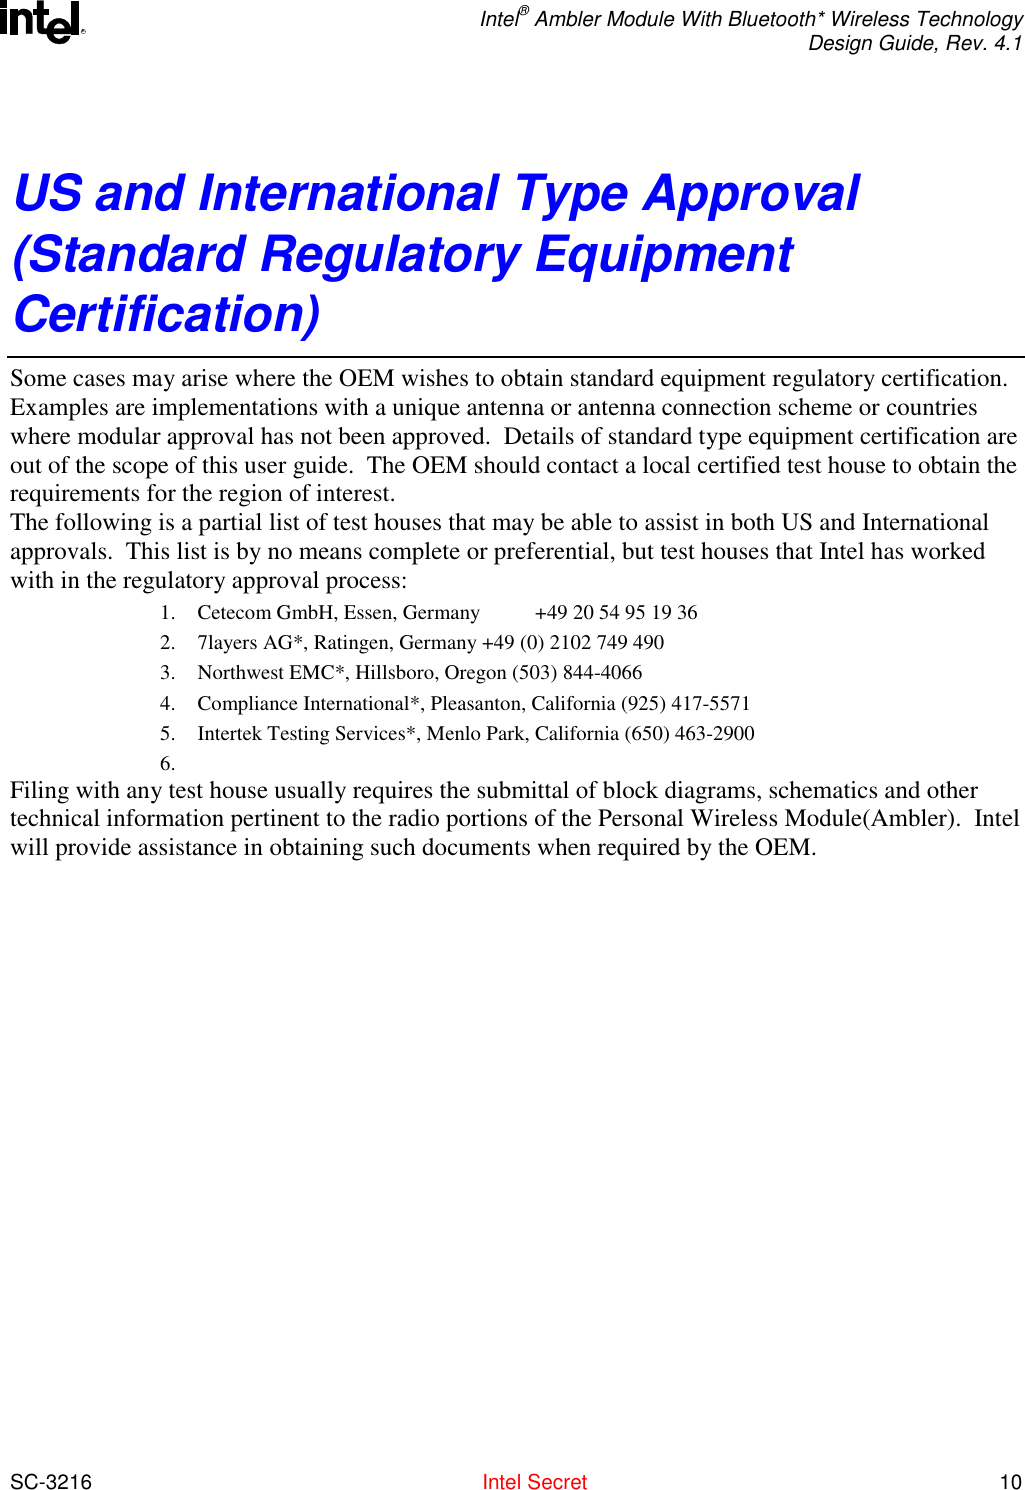  Intel® Ambler Module With Bluetooth* Wireless Technology Design Guide, Rev. 4.1  SC-3216  Intel Secret 10 RUS and International Type Approval (Standard Regulatory Equipment Certification) Some cases may arise where the OEM wishes to obtain standard equipment regulatory certification.  Examples are implementations with a unique antenna or antenna connection scheme or countries where modular approval has not been approved.  Details of standard type equipment certification are out of the scope of this user guide.  The OEM should contact a local certified test house to obtain the requirements for the region of interest.   The following is a partial list of test houses that may be able to assist in both US and International approvals.  This list is by no means complete or preferential, but test houses that Intel has worked with in the regulatory approval process: 1.  Cetecom GmbH, Essen, Germany  +49 20 54 95 19 36   2.  7layers AG*, Ratingen, Germany +49 (0) 2102 749 490 3.  Northwest EMC*, Hillsboro, Oregon (503) 844-4066 4.  Compliance International*, Pleasanton, California (925) 417-5571 5.  Intertek Testing Services*, Menlo Park, California (650) 463-2900 6.  Filing with any test house usually requires the submittal of block diagrams, schematics and other technical information pertinent to the radio portions of the Personal Wireless Module(Ambler).  Intel will provide assistance in obtaining such documents when required by the OEM. 